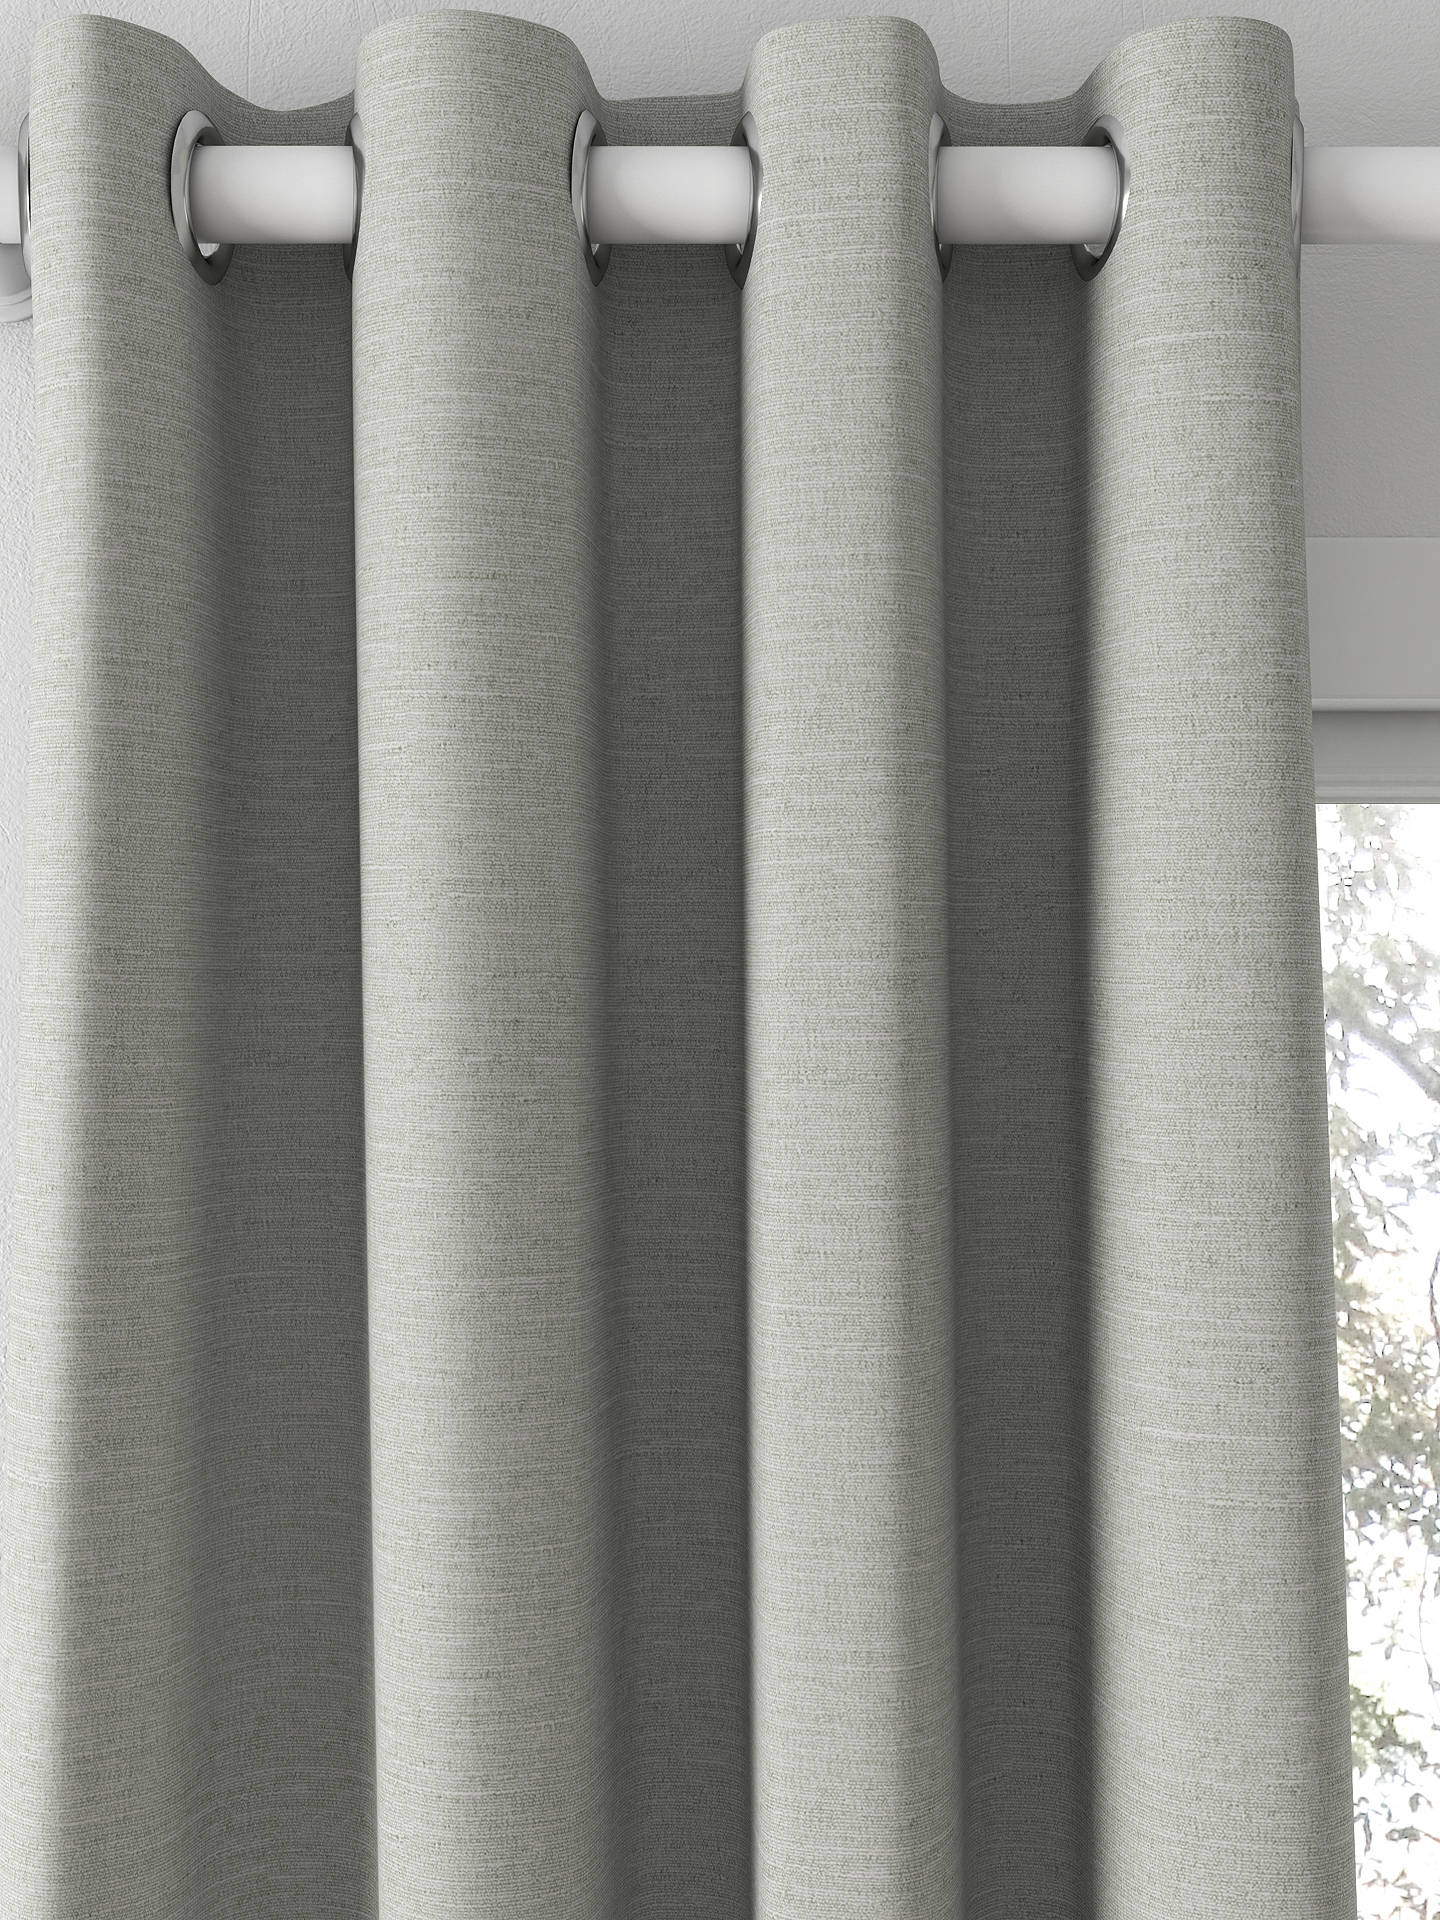 Designers Guild Mirissa Made to Measure Curtains, Silver